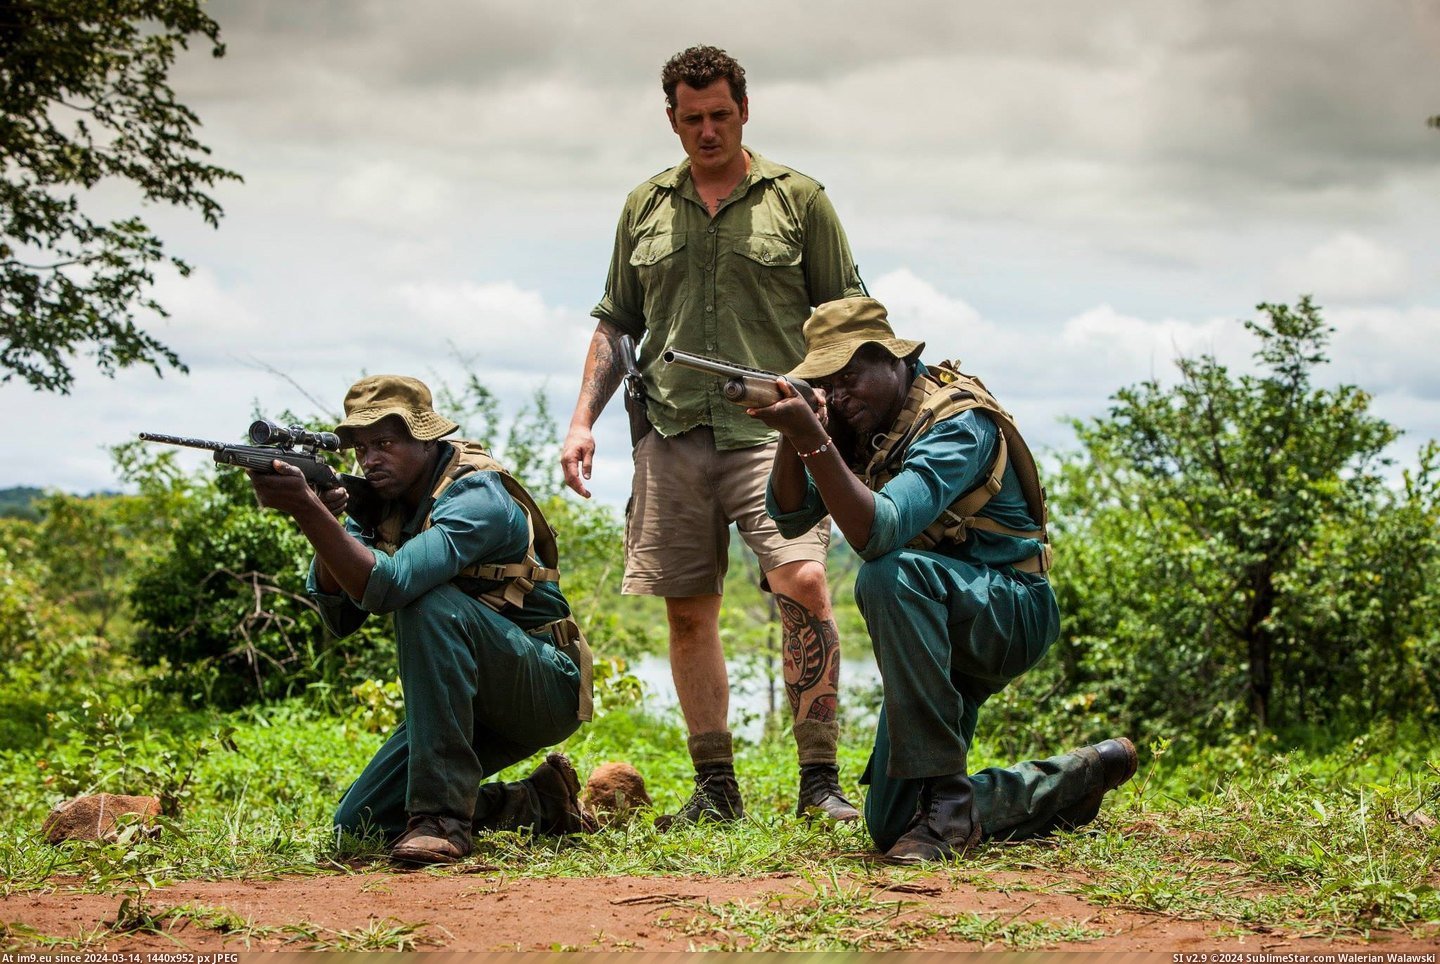 #Friend #Special #Turned #Military #Save #Anti #Ops #Damian [Pics] Former special ops turned anti-poaching crusader—my friend, Damian, is using military tactics to save Rhinos from poacher Pic. (Bild von album My r/PICS favs))